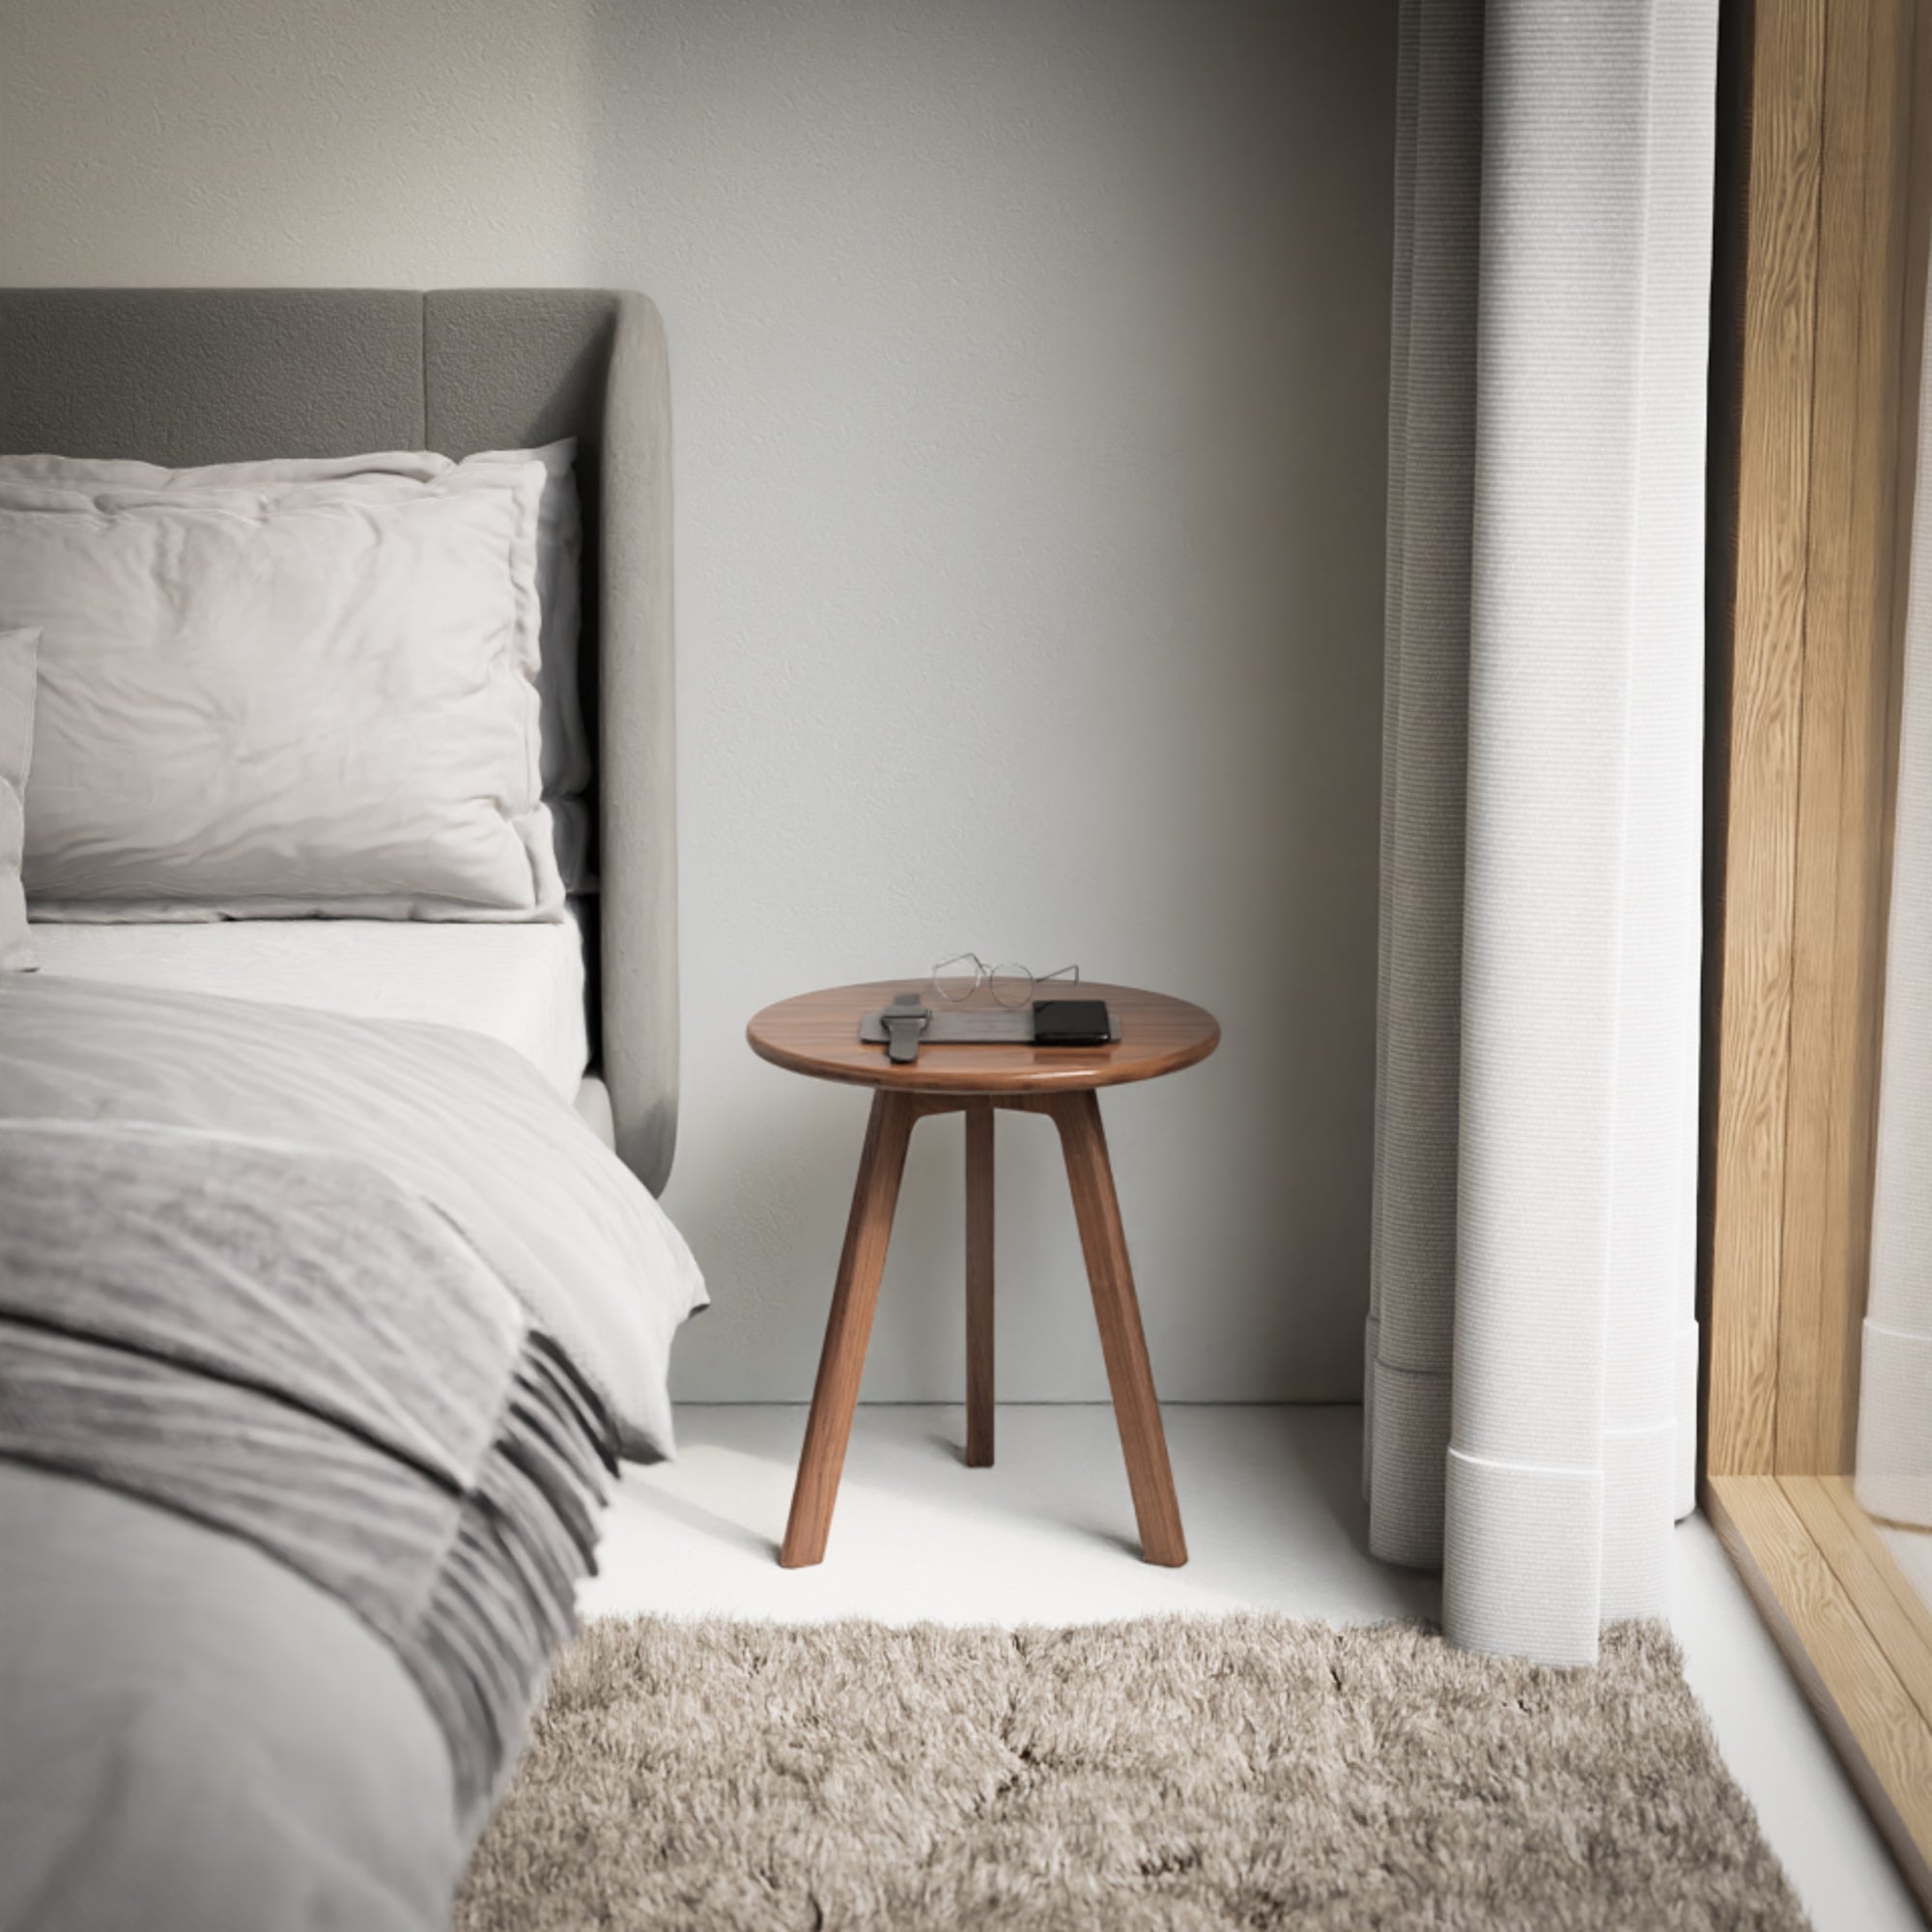 This round bedside table is a stylish and functional addition to any bedroom. Its round, walnut design is made of dark wood and is perfect for holding a lamp or other bedside essentials. Its small size and simple, wooden design are enhanced by its cherry accent and handmade construction. Add a touch of sophistication to your bedroom with this versatile and practical bedside table